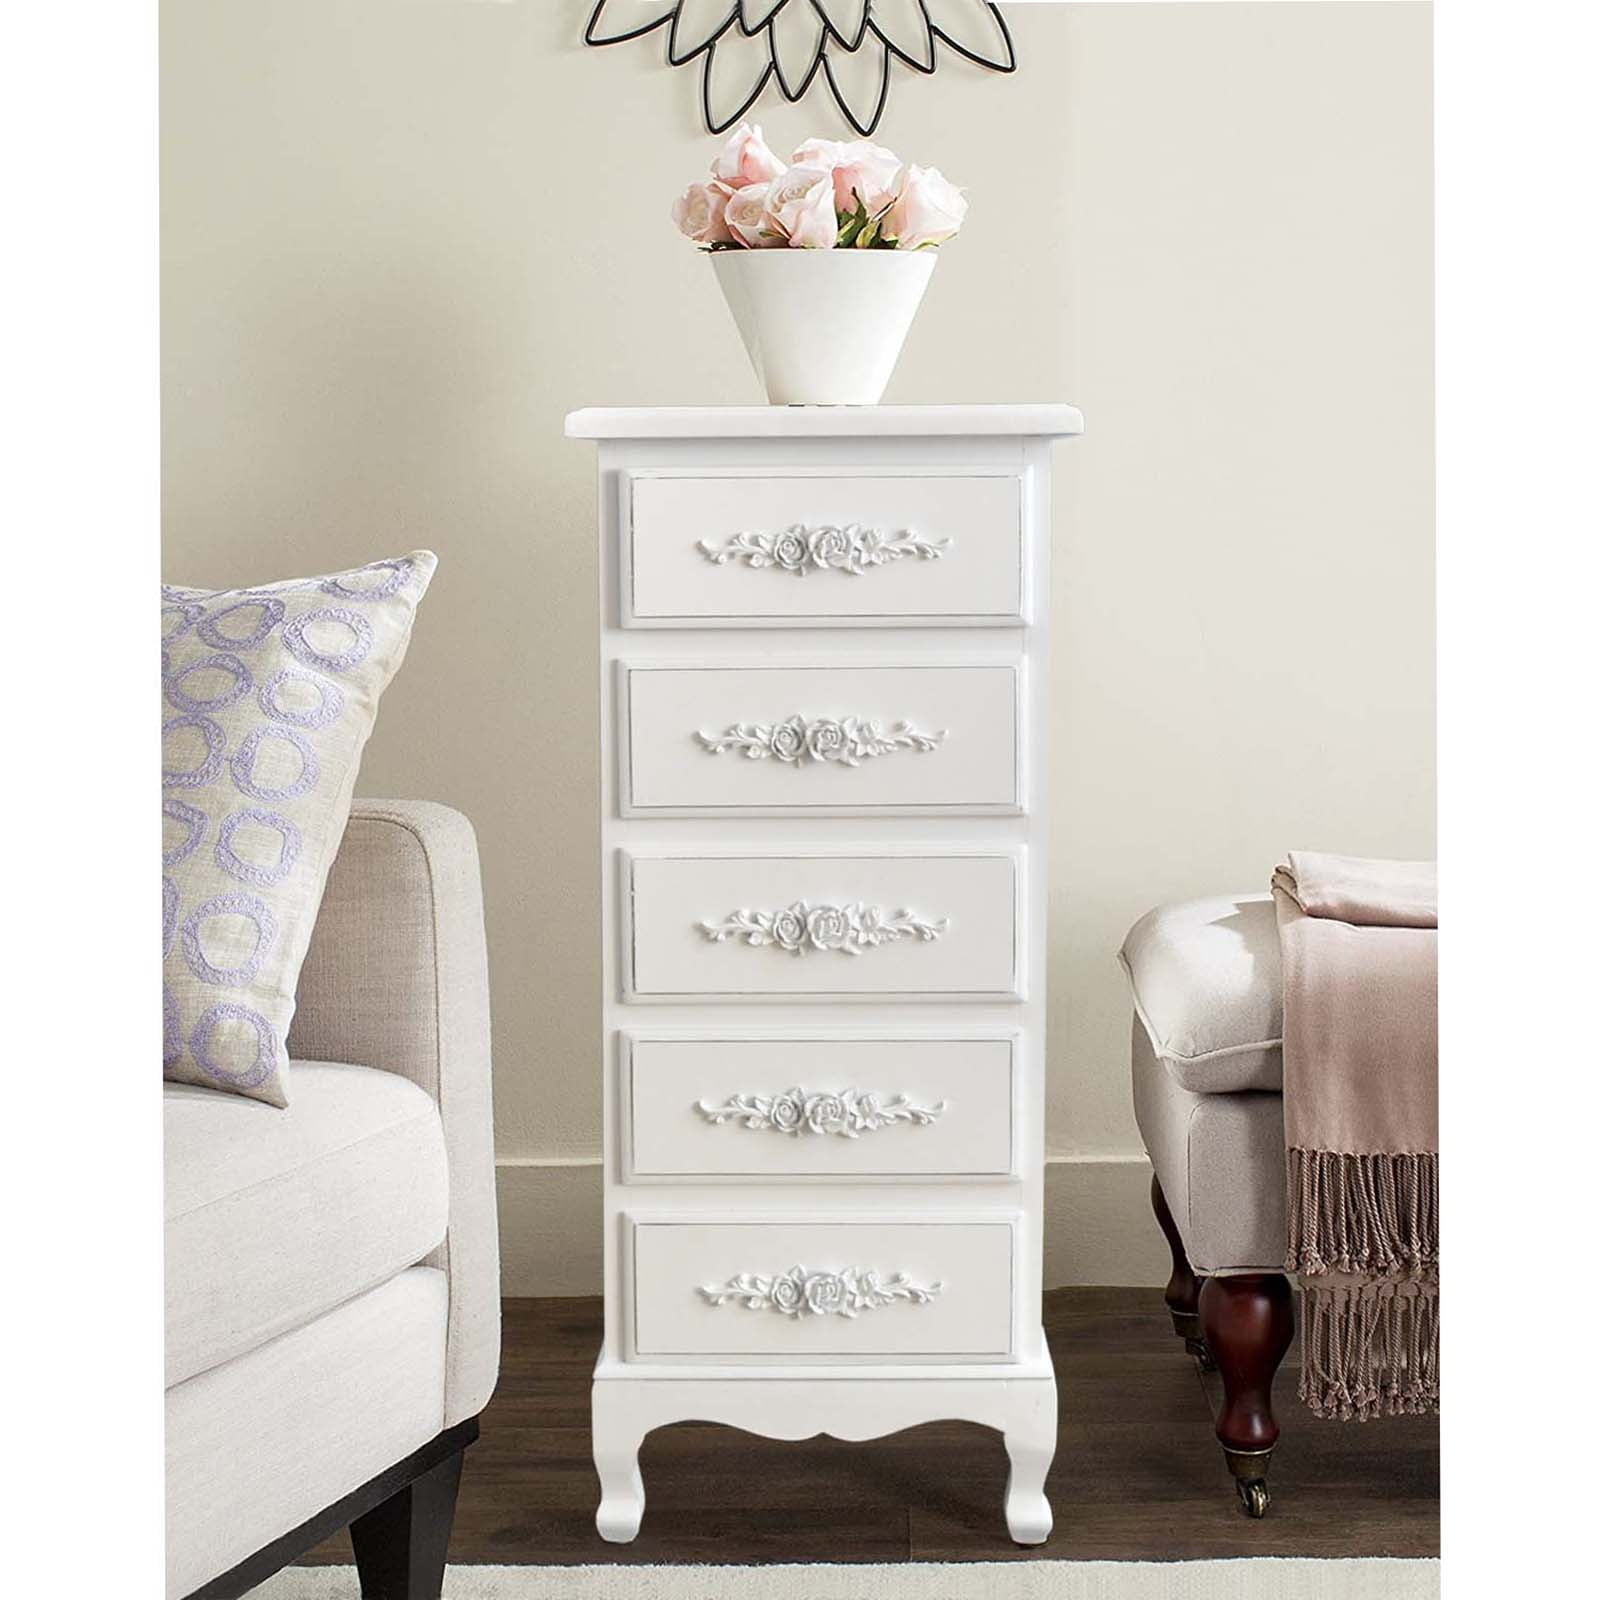 Shabby Chic Baby Clothes Nursery, Dresser With Jewelry Drawer